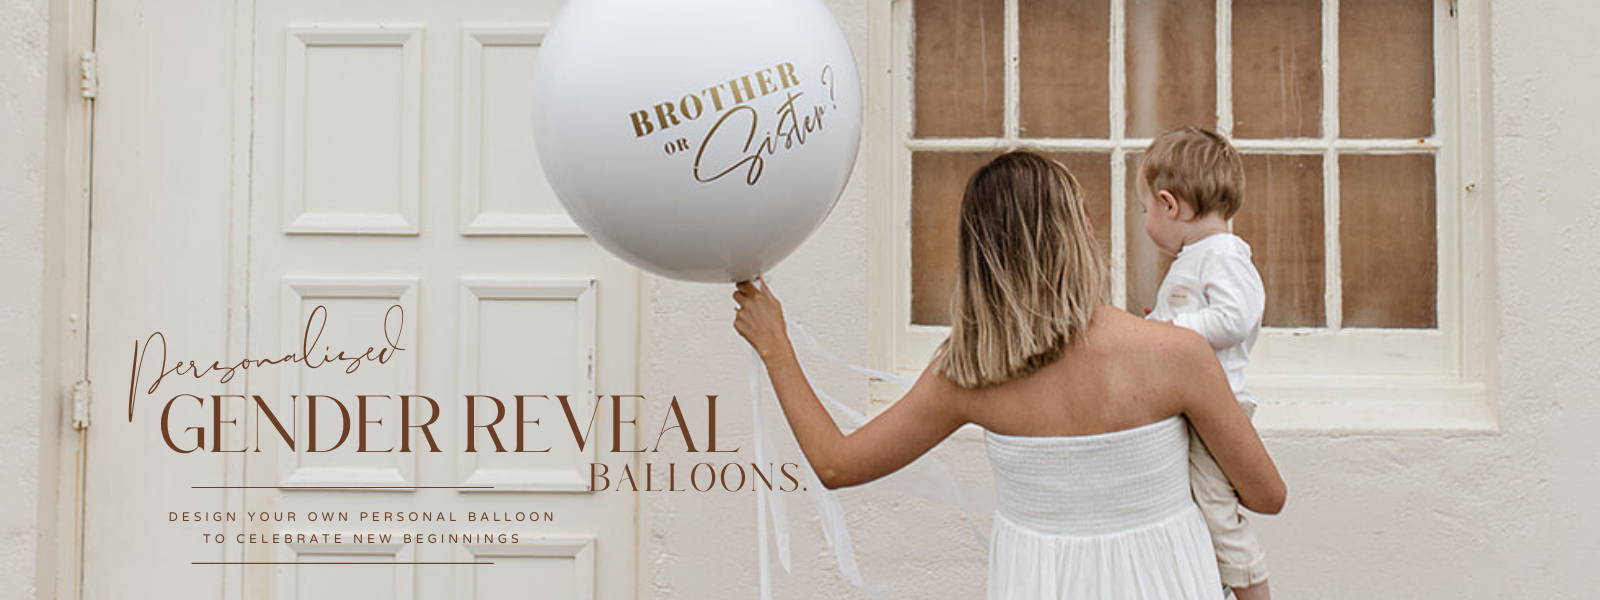 Personalise your own white gender reveal balloon.